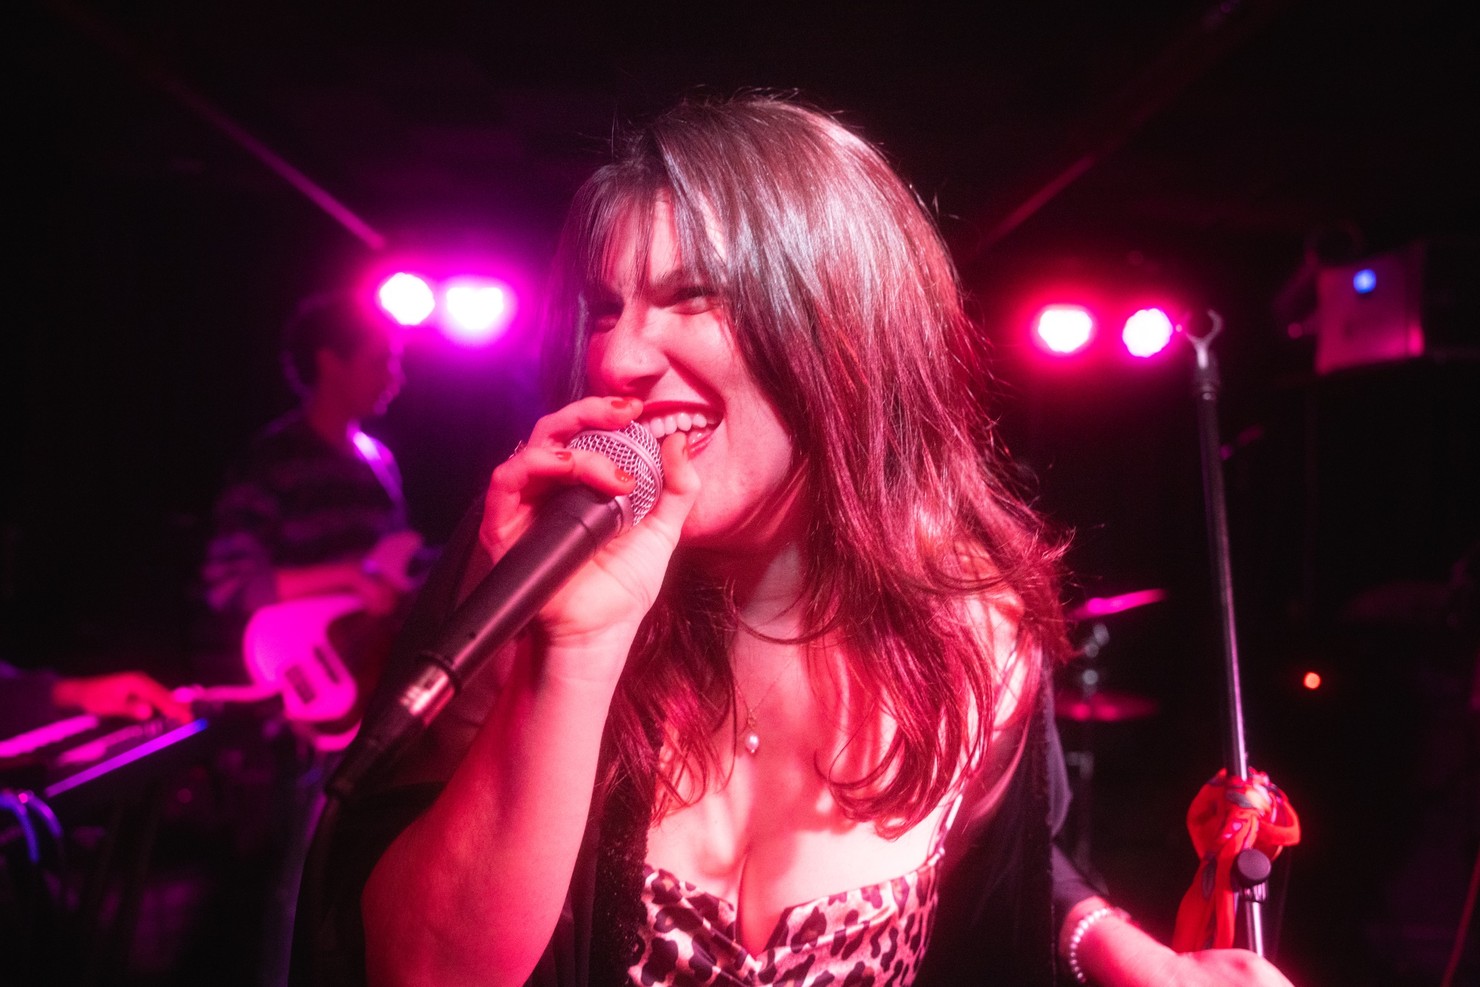 A woman leaning forward and singing into a microphone while magenta lights shine upon her.